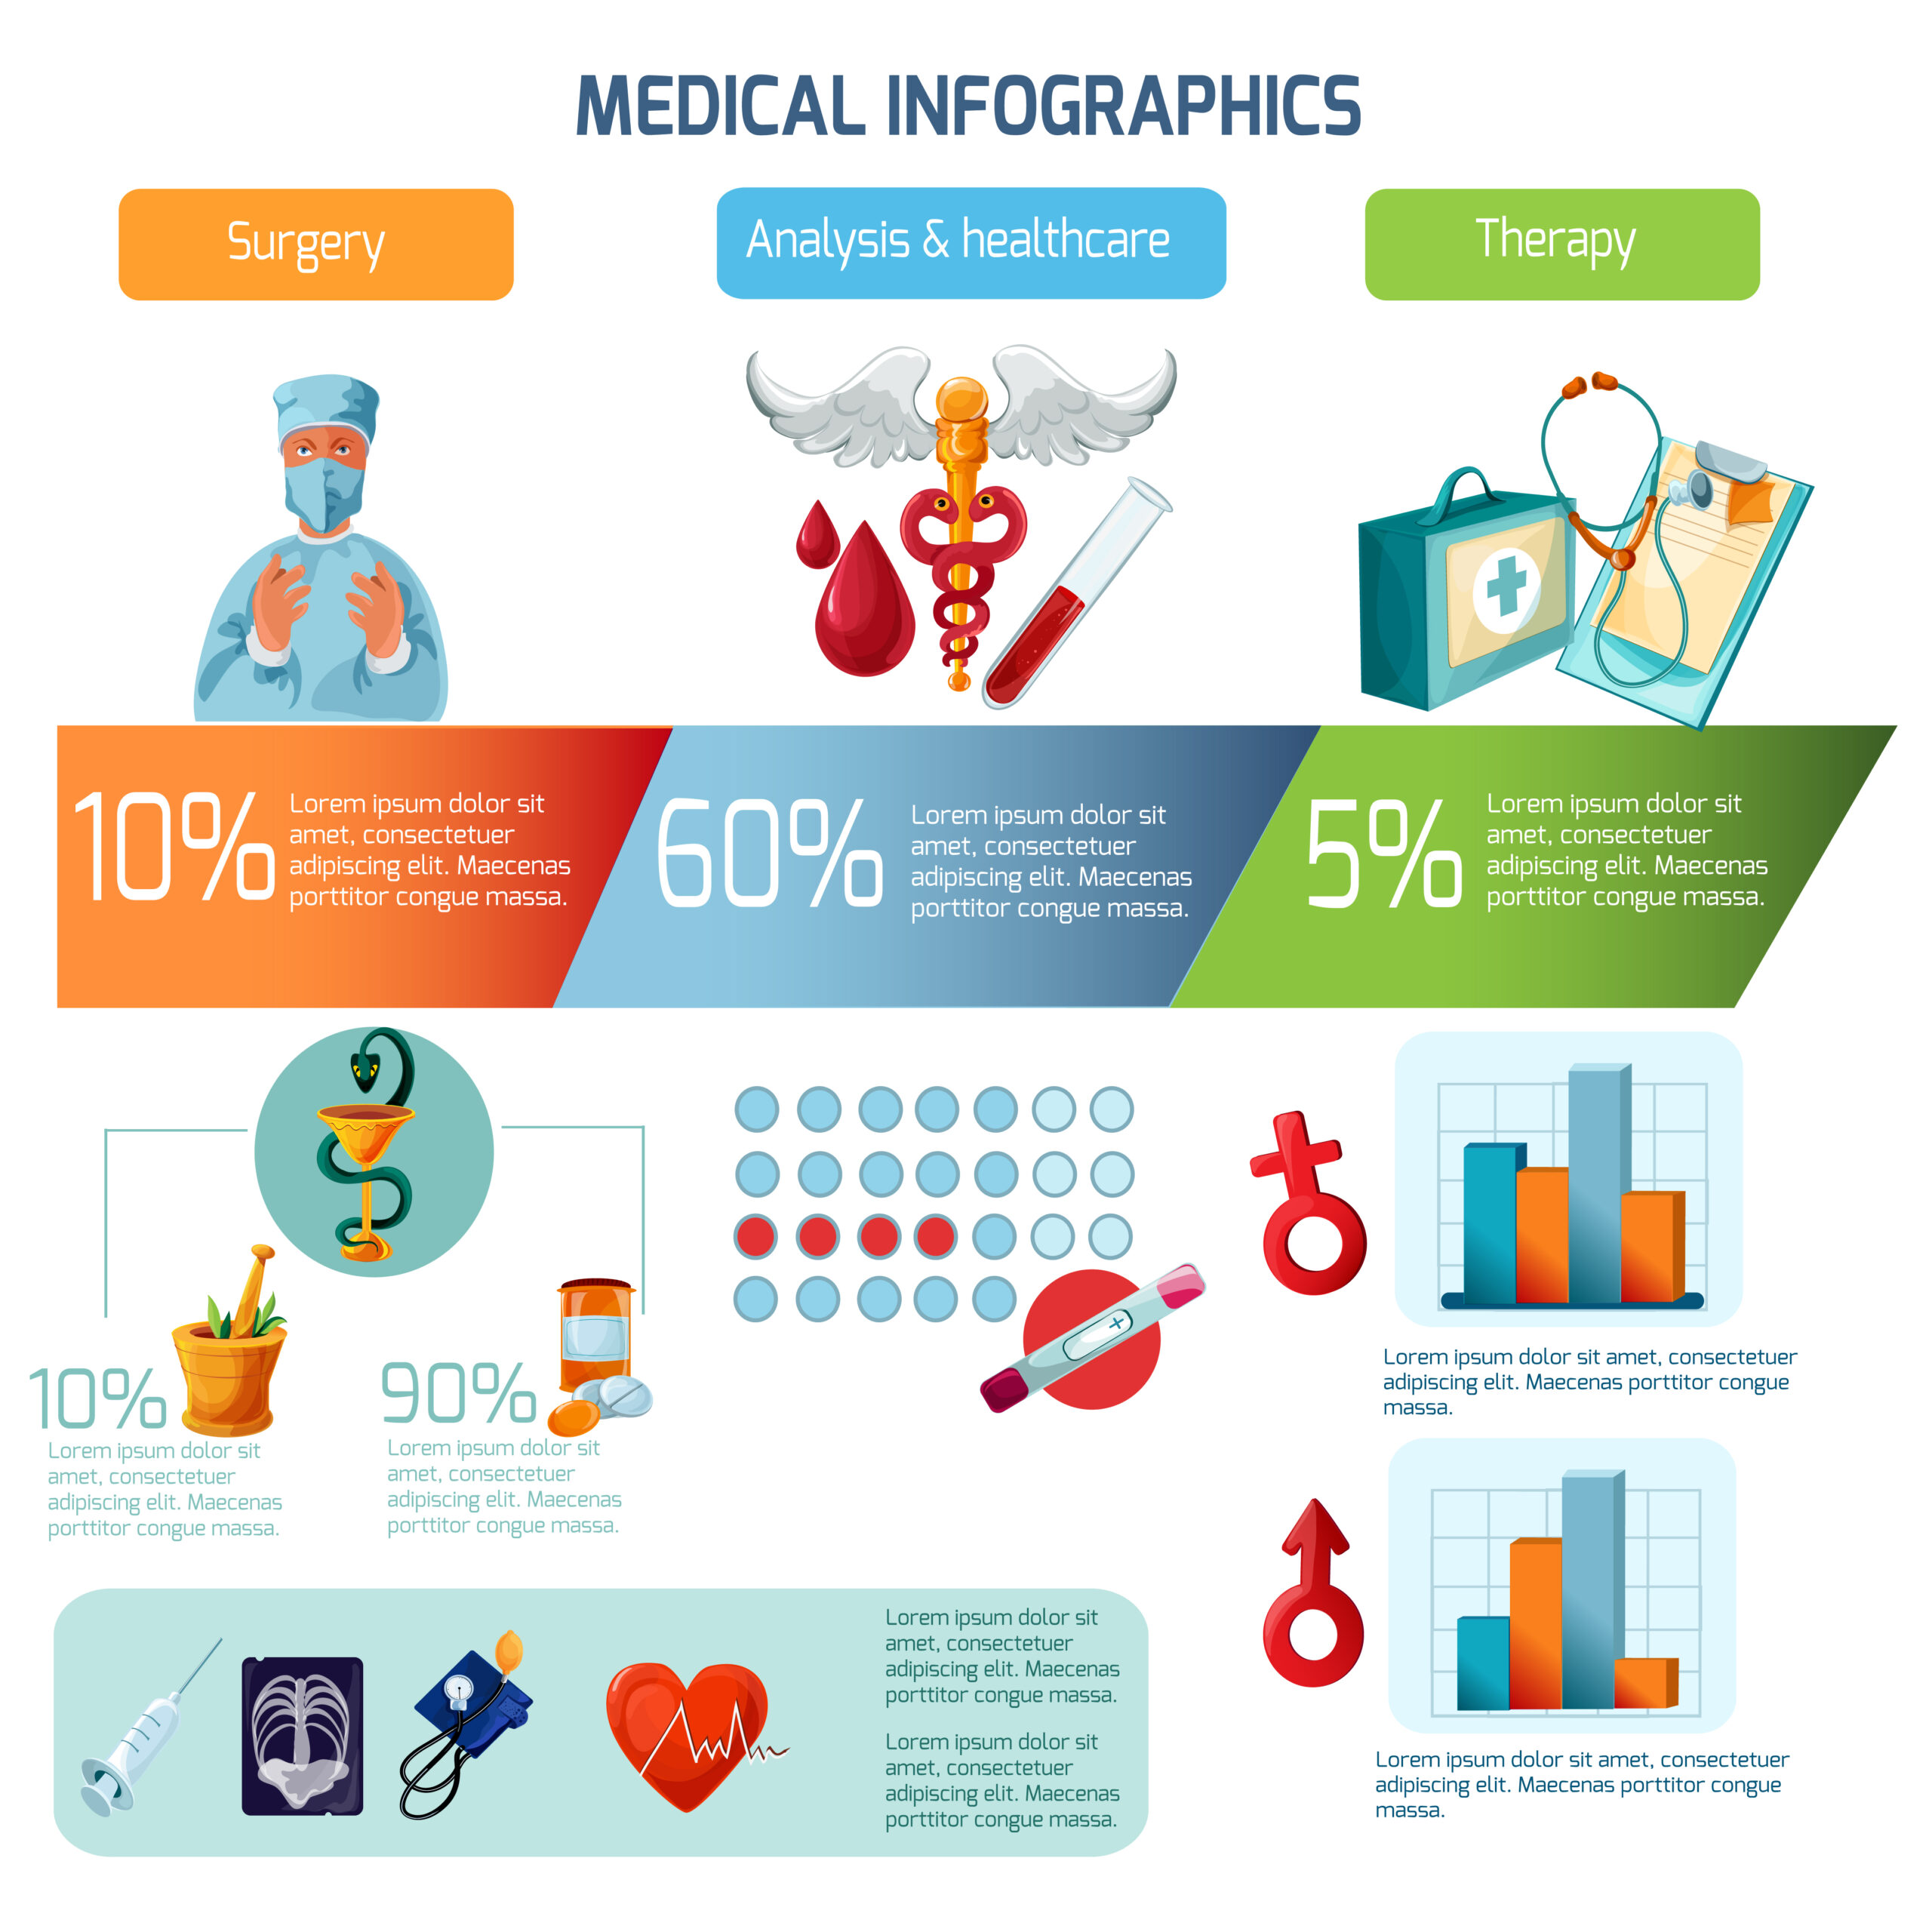 15 Frightening Stats on Medication Adherence (Plus Infographic)